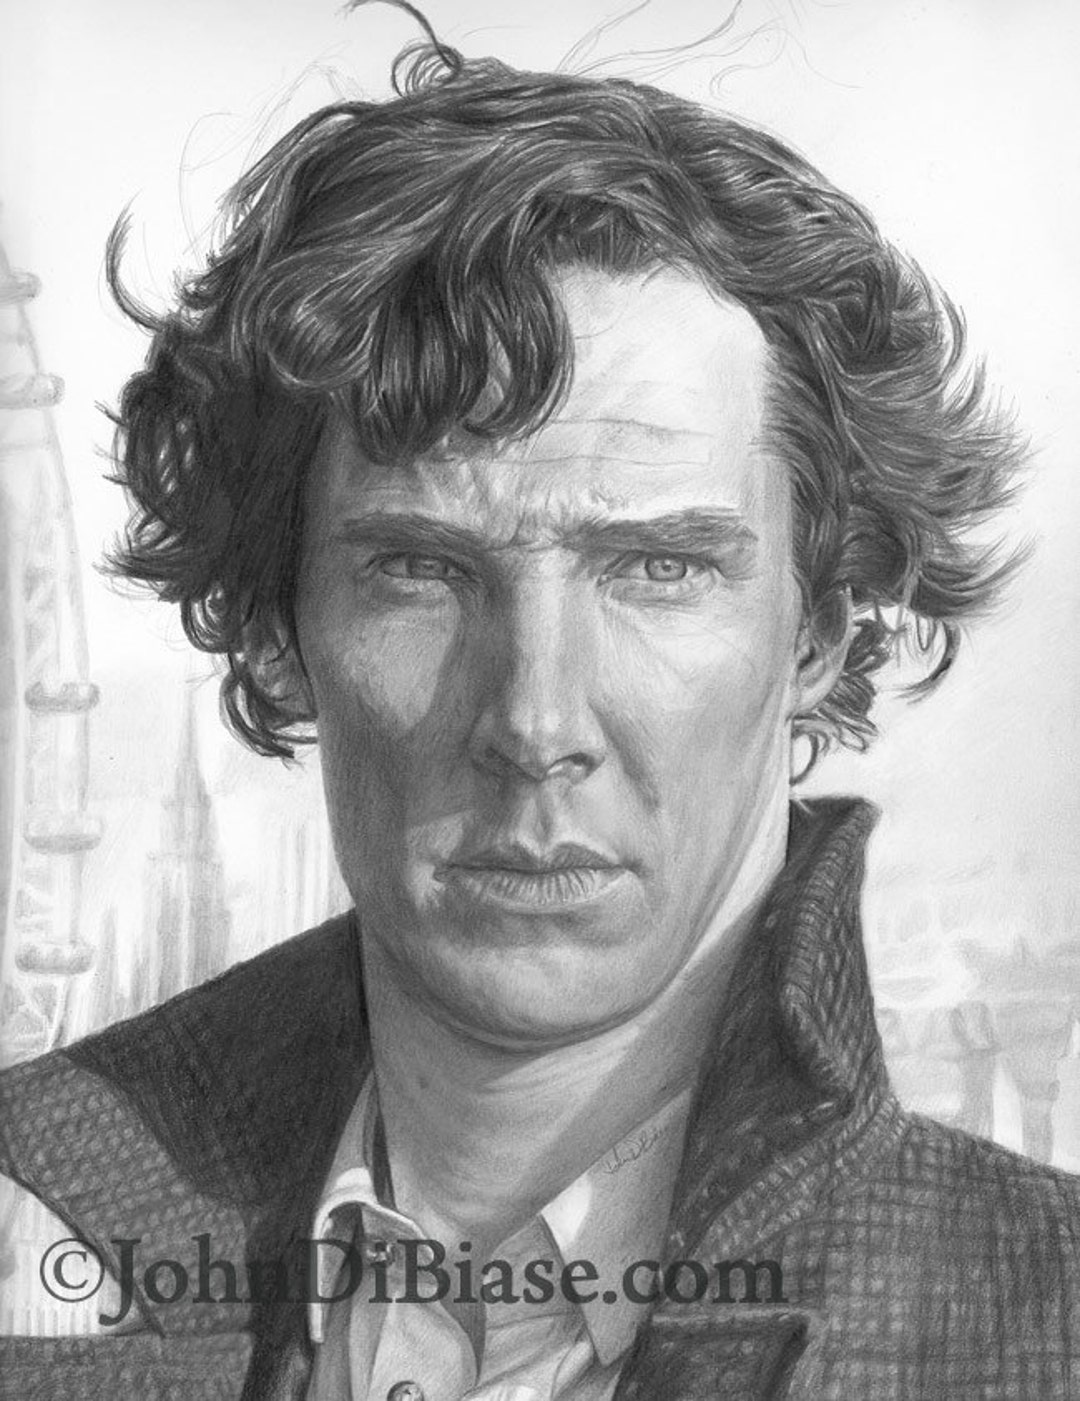 Buy Benedict Cumberbatch Original Black and White Drawing Online in India   Etsy